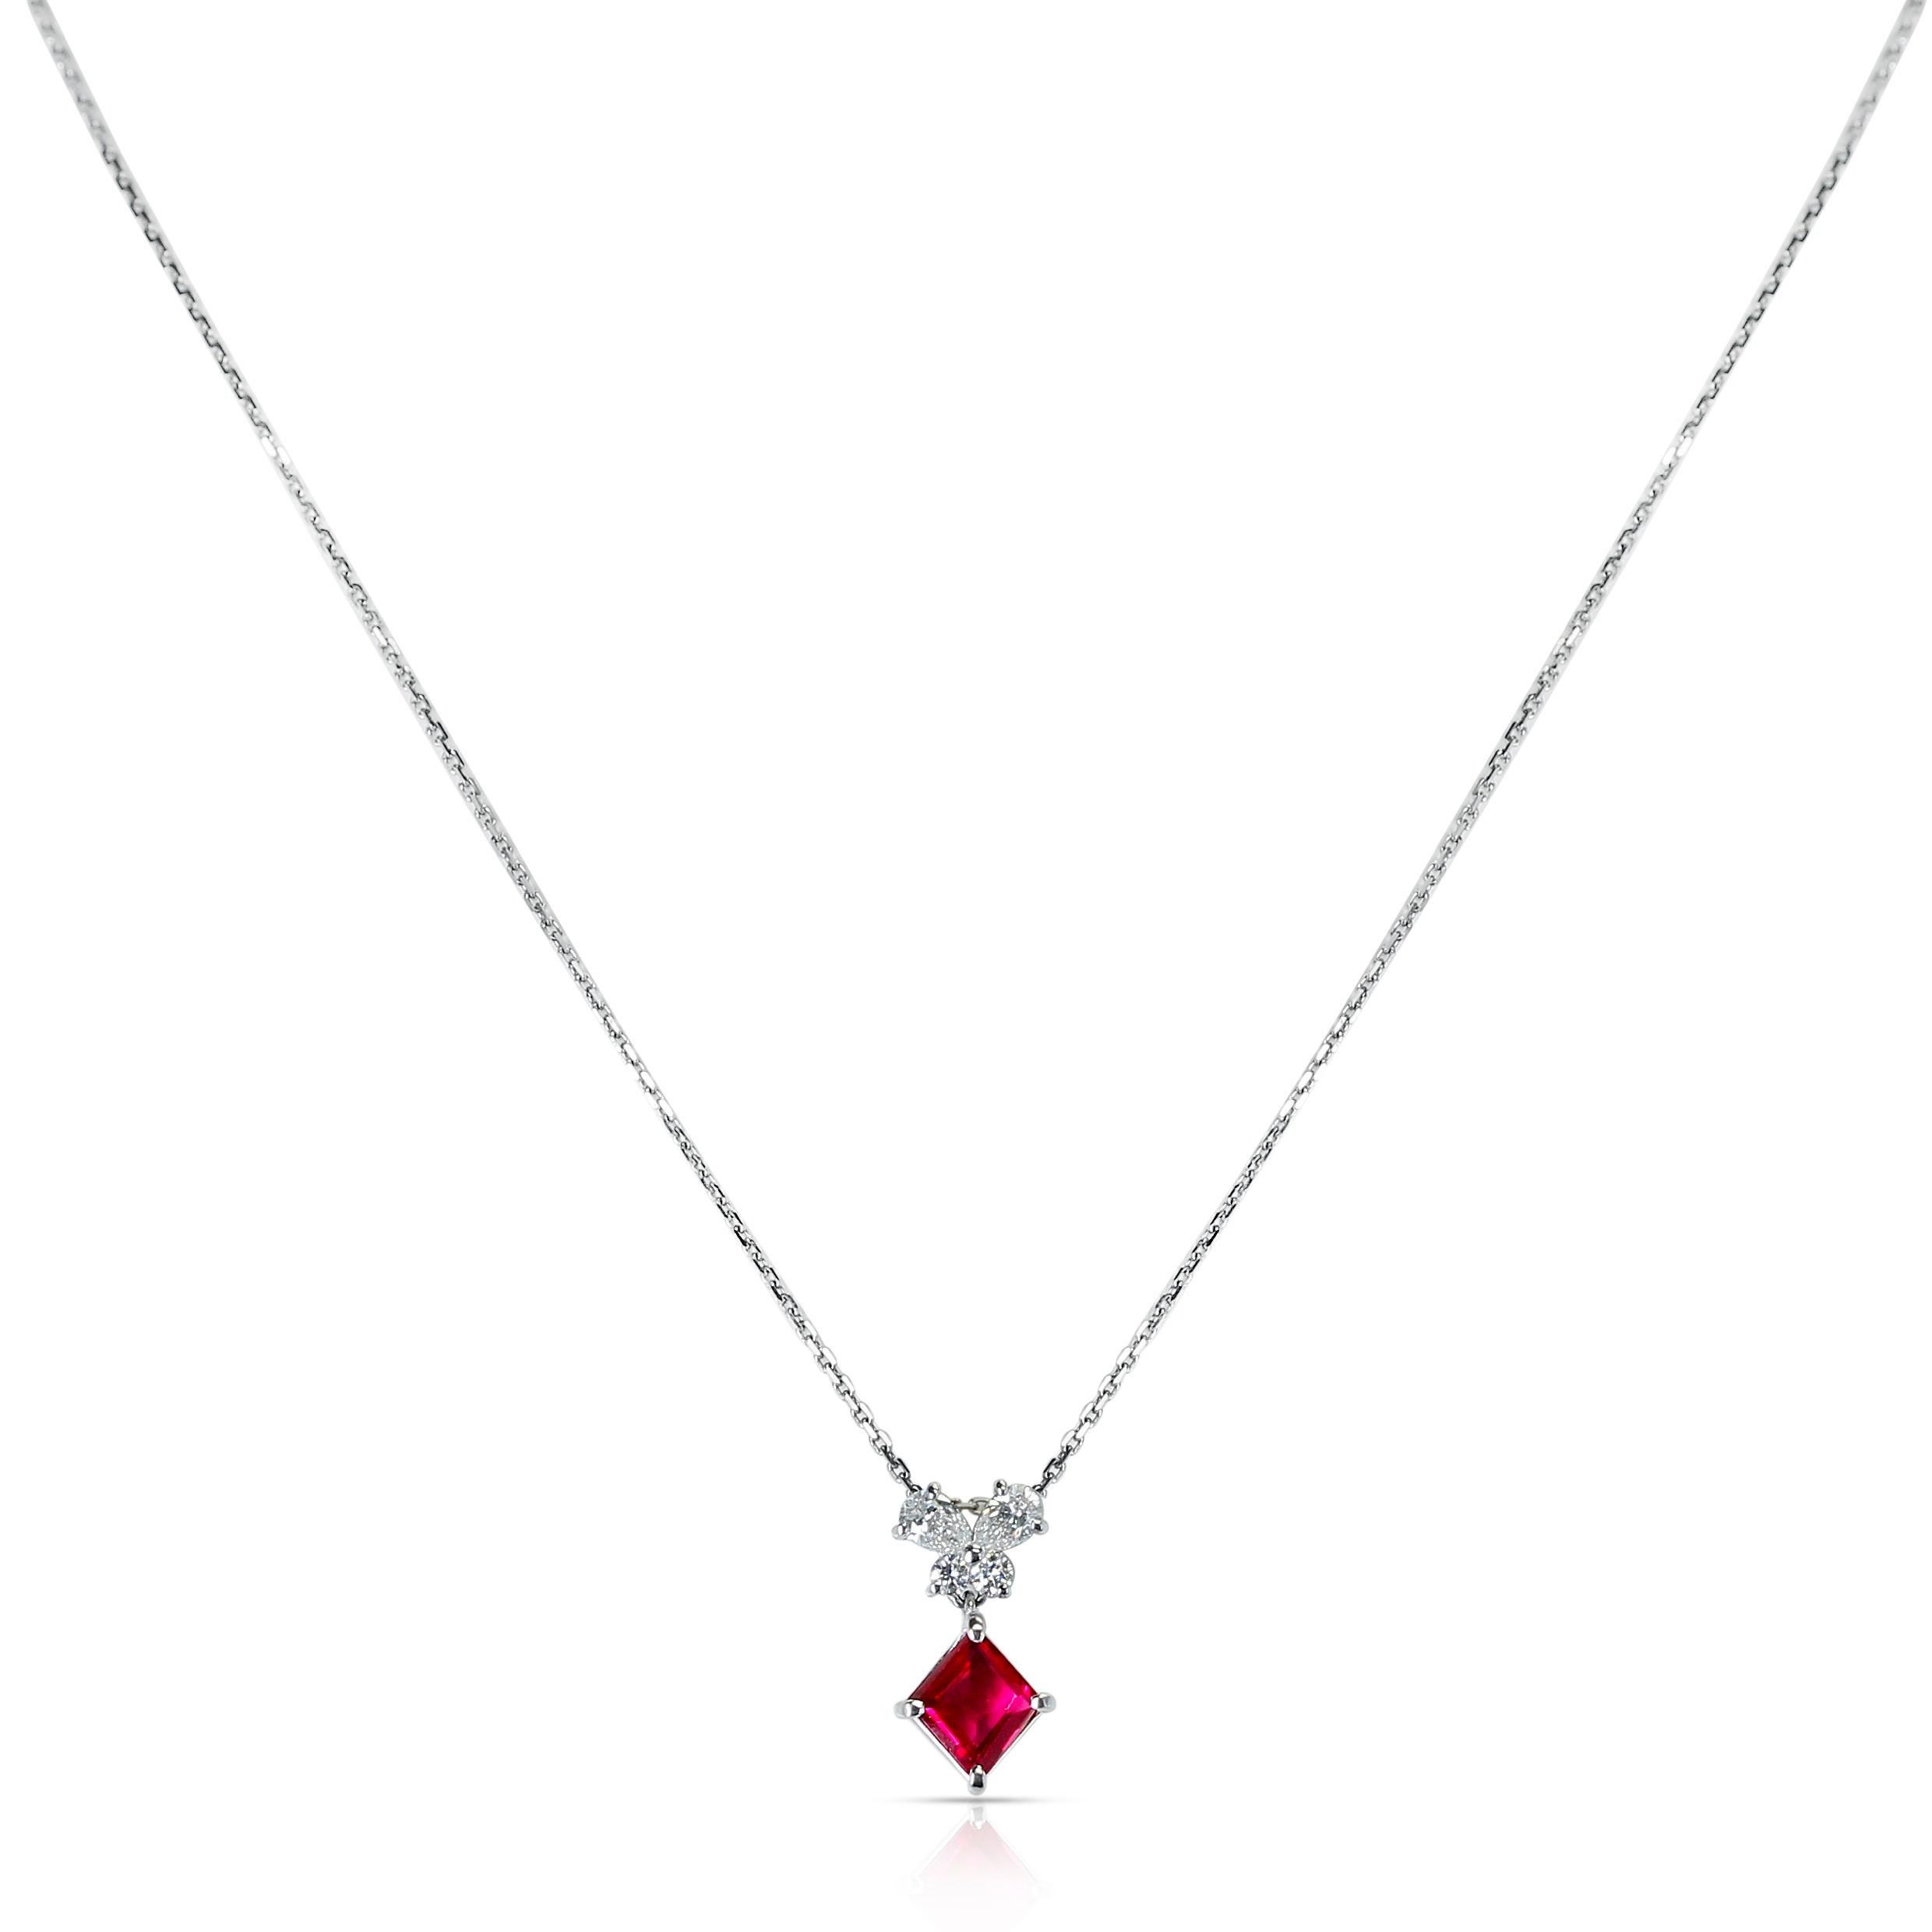 A 0.94 ct. Ruby and 0.32 ct. Diamonds Pendant Necklace made in Platinum. The total weight of the necklace is 3.82 grams. 
